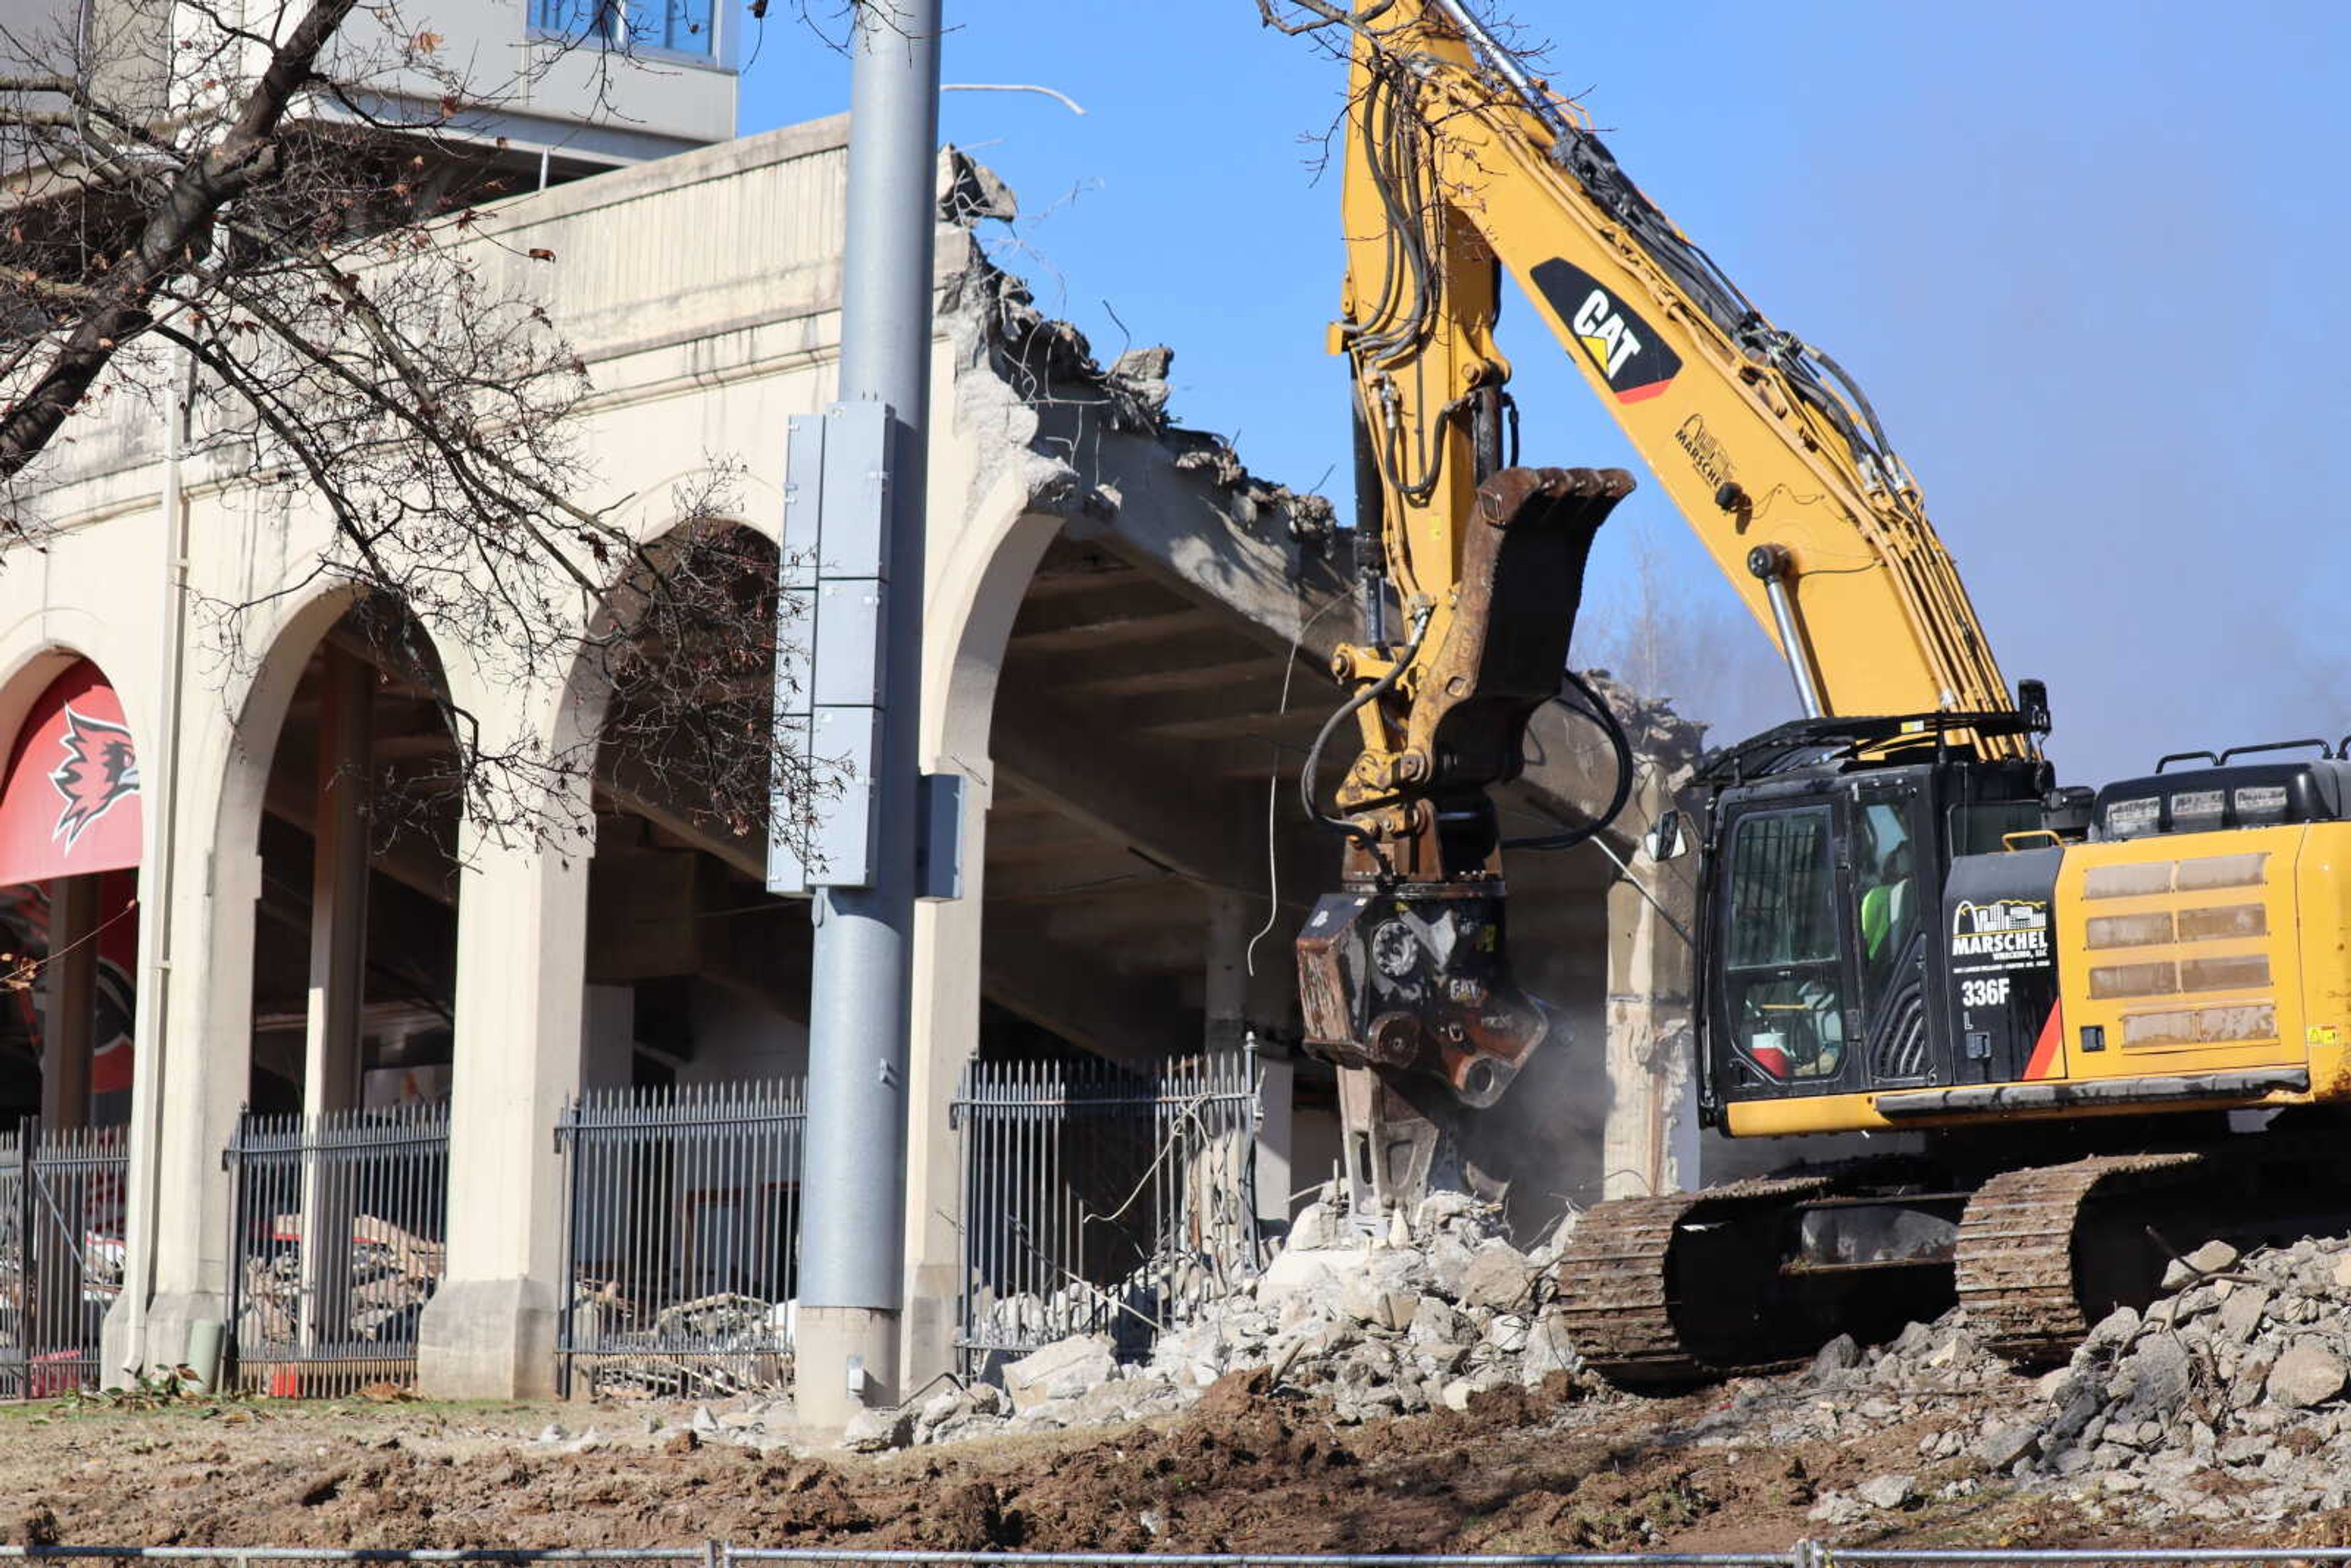 On Dec. 8, crews began demolition of the aging south bleachers of Houck Stadium. A complete renovation of the south side is planned for 2022.